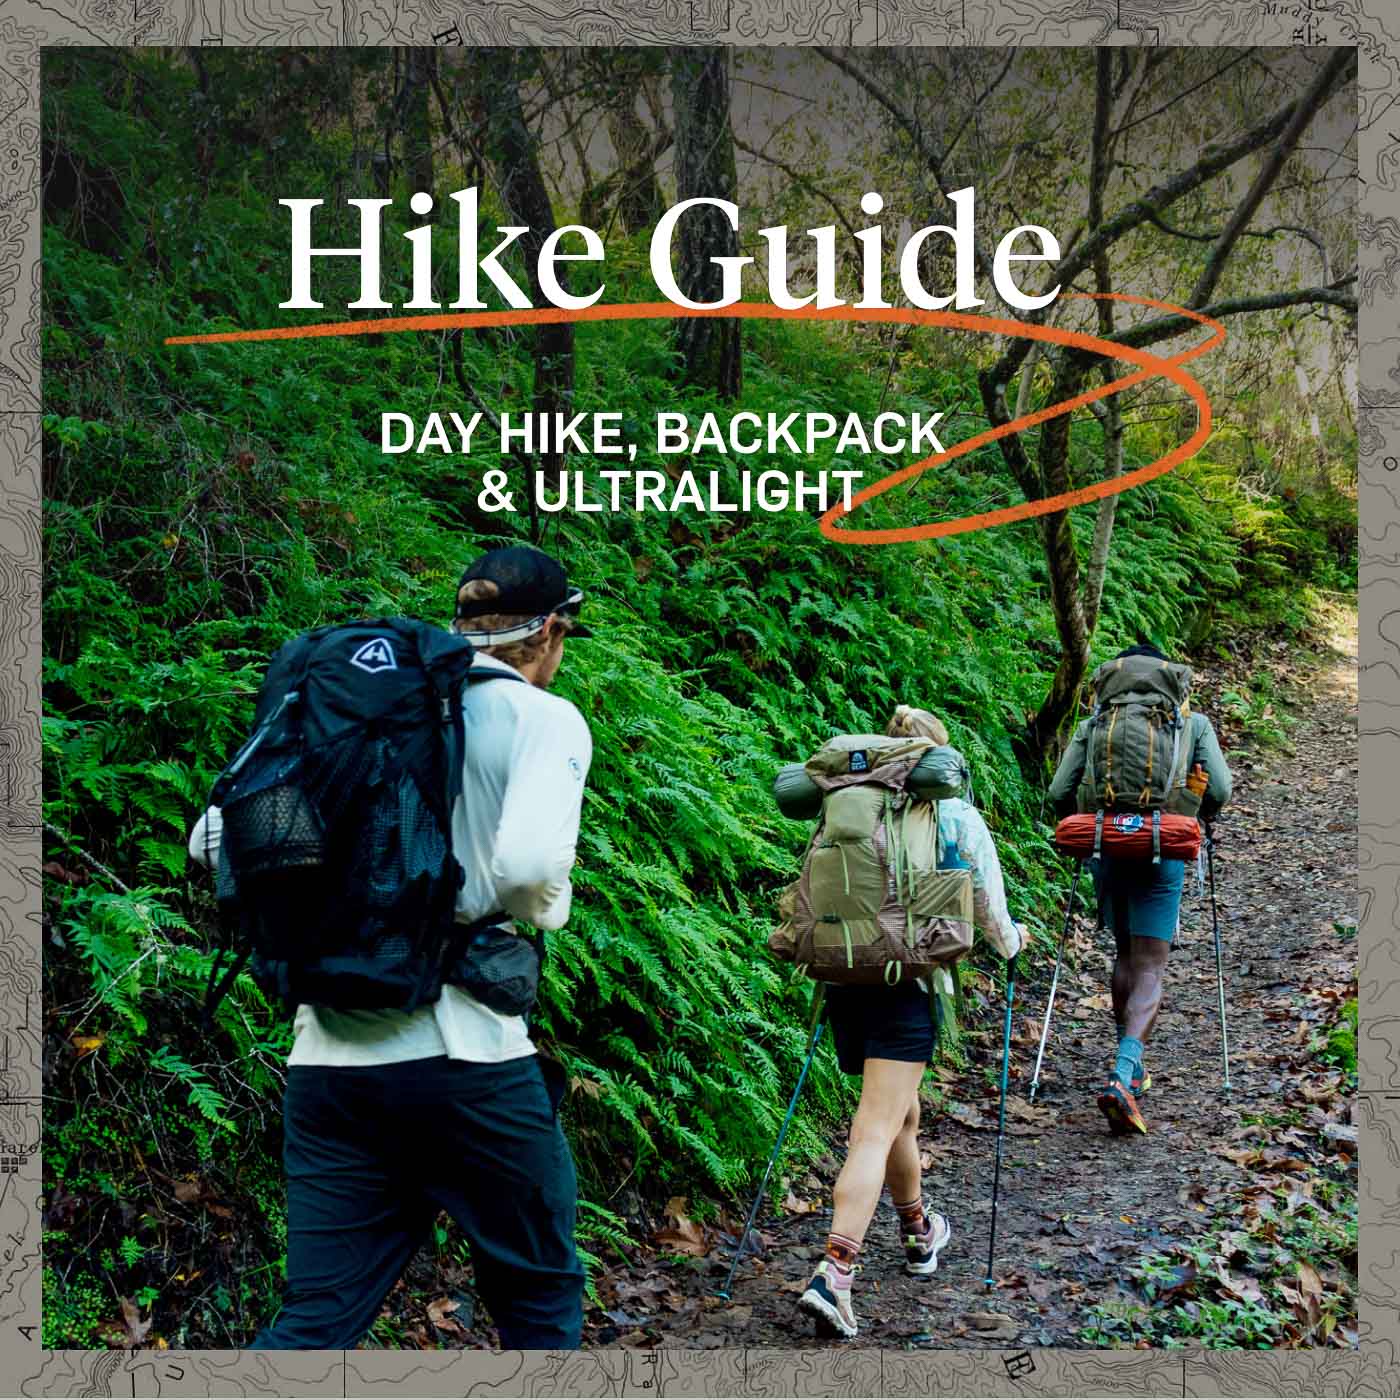 American Gear Guide – Your guide specializing in American outdoor gear made  in the USA. Find the highest quality gear for backpacking, camping,  climbing, prepping, hunting, and nearly any other adventure. Buy